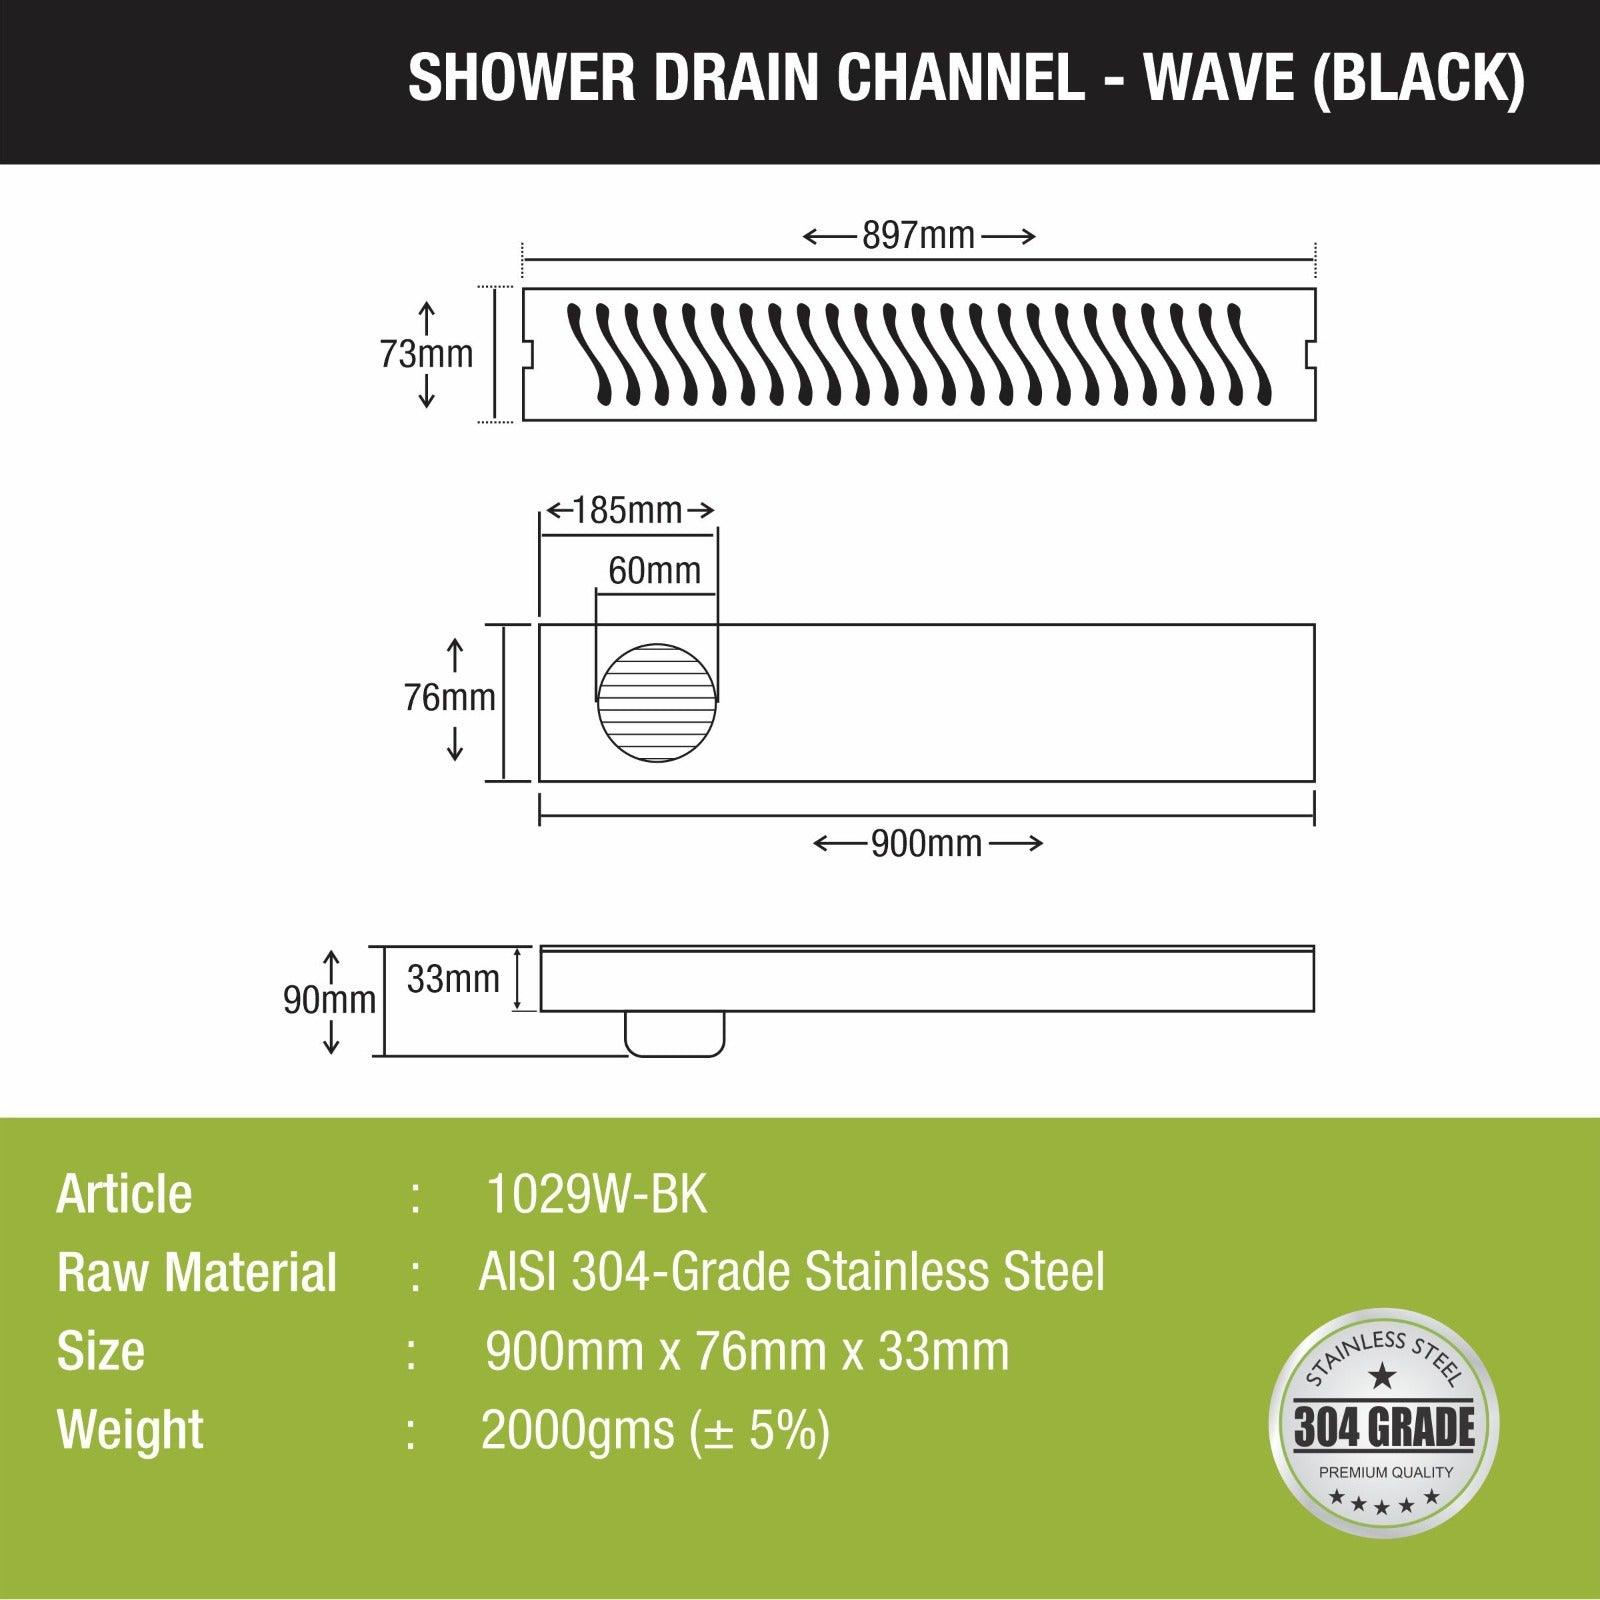 Wave Shower Drain Channel - Black (36 x 3 Inches) size and measurement